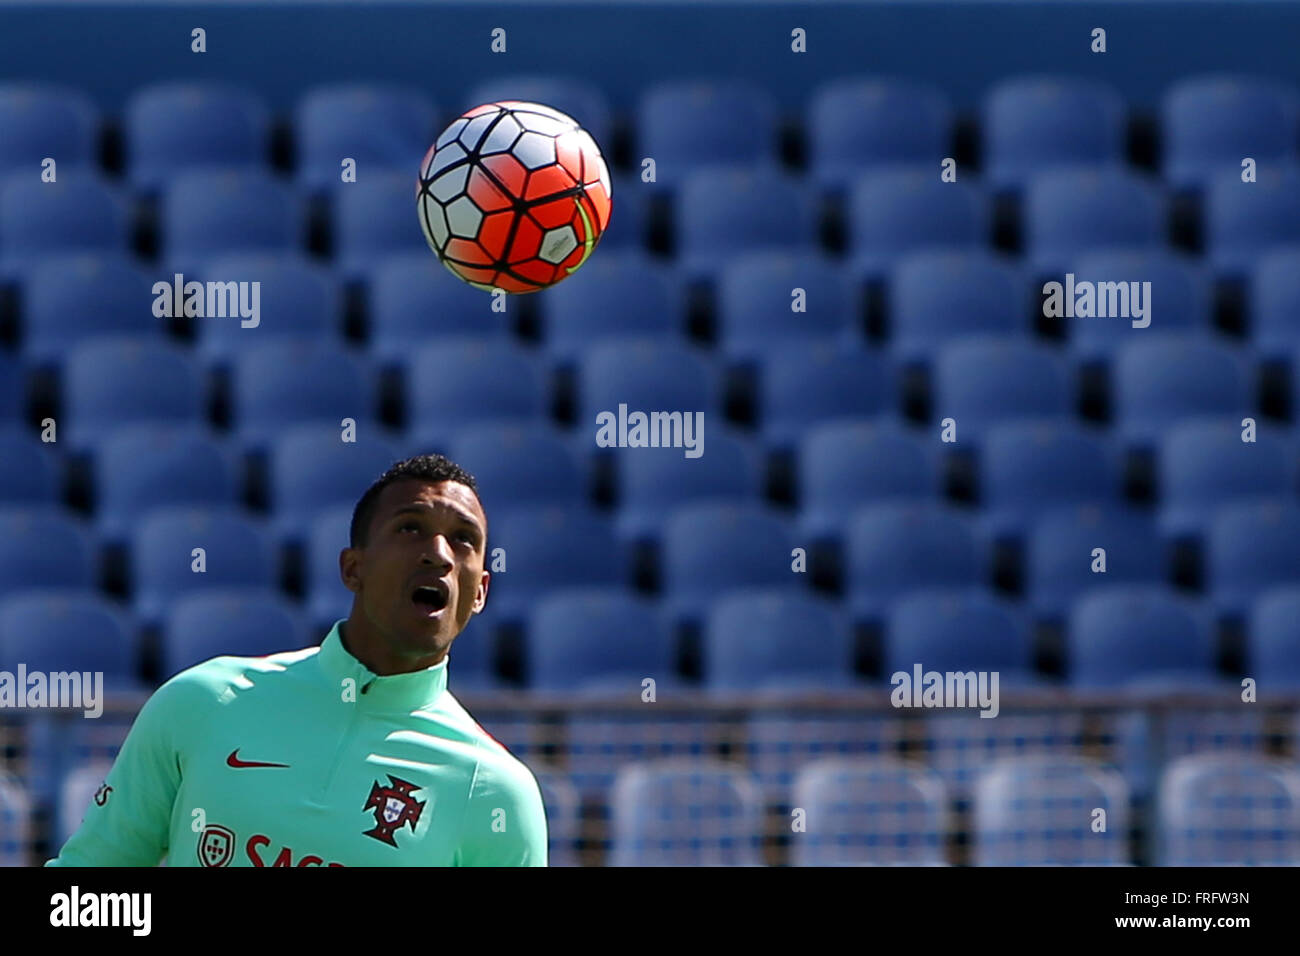 Lisbon, Portugal. 22nd Mar, 2016. Portugal's soccer forward Nani during a practice session at the Restelo stadium in Lisbon, Portugal on March 22, 2016, ahead of the friendly matches against Bulgaria on March 25 and with Belgium on March 29 in preparation for the Euro 2016 in France. Credit:  Pedro Fiuza/ZUMA Wire/Alamy Live News Stock Photo